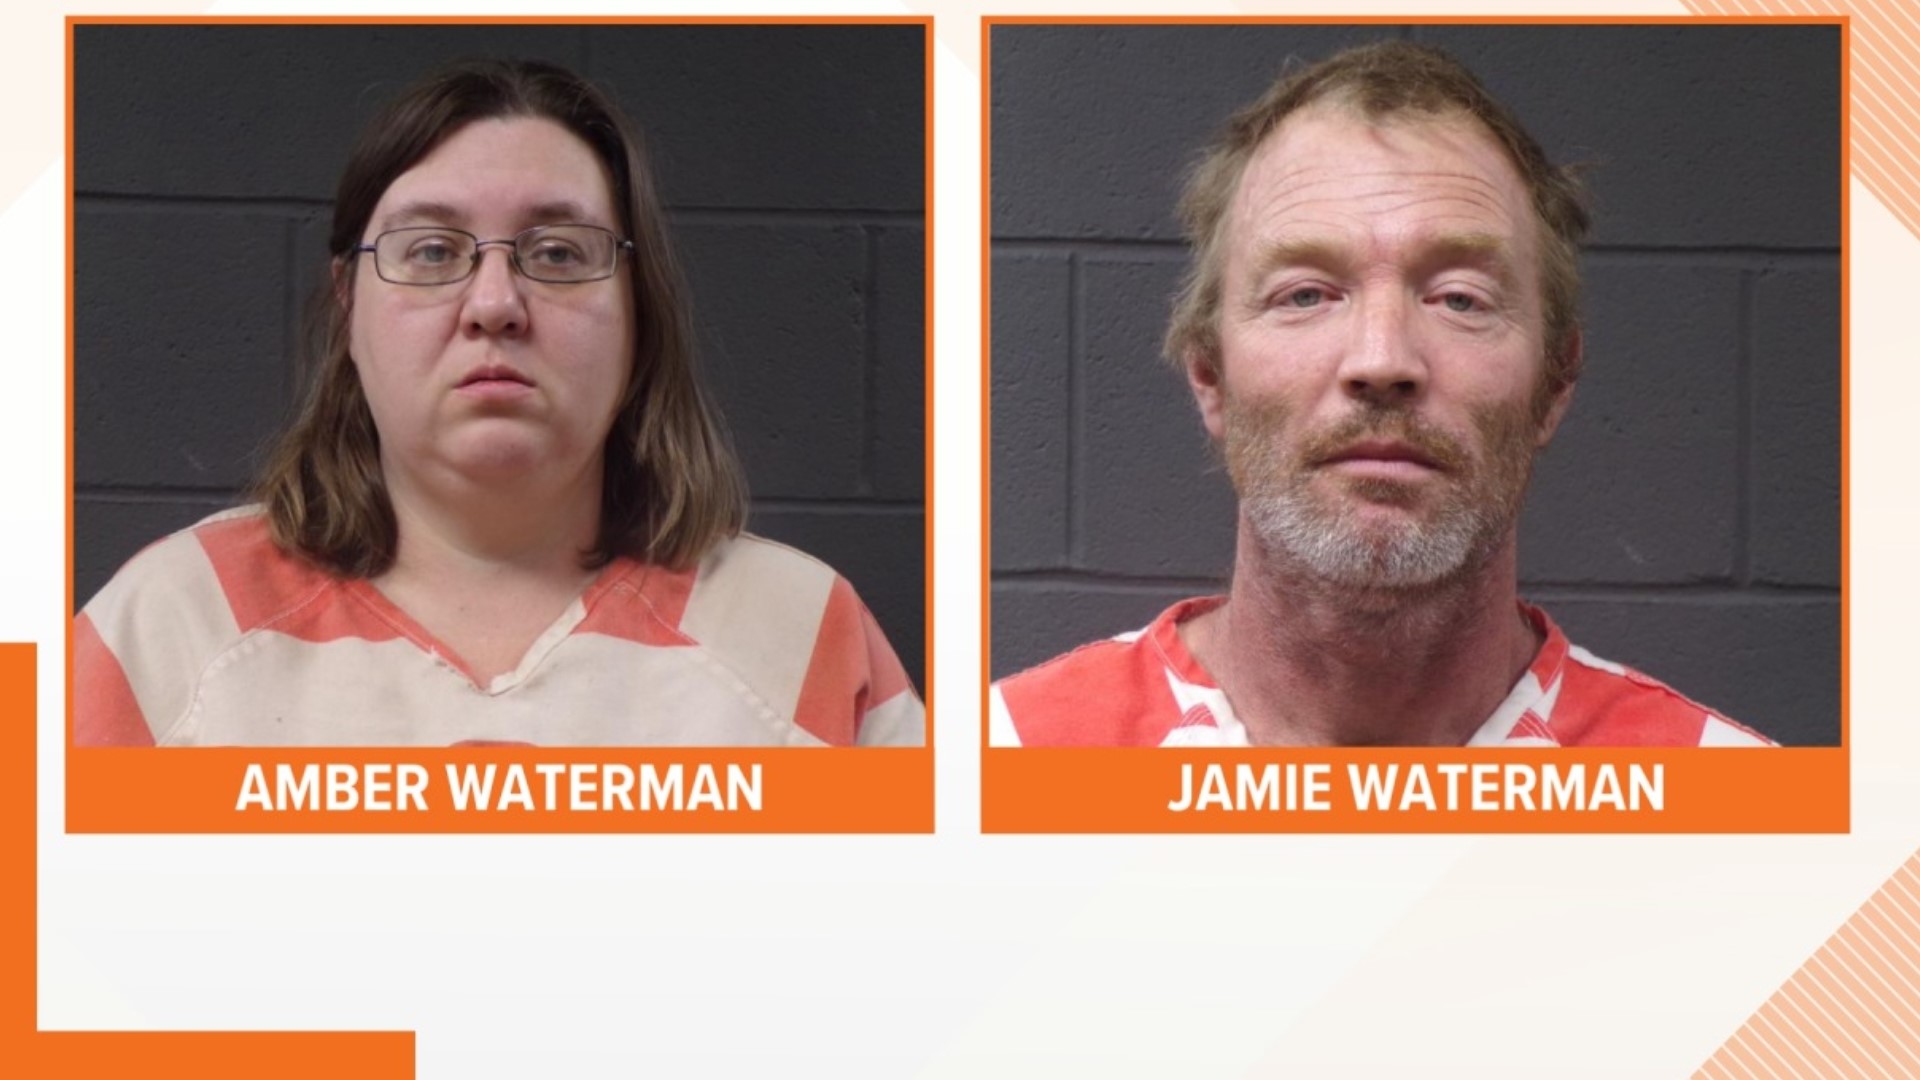 Amber and Jamie Waterman are facing charges for allegedly kidnapping and murdering Ashley Bush in order to take her unborn child.